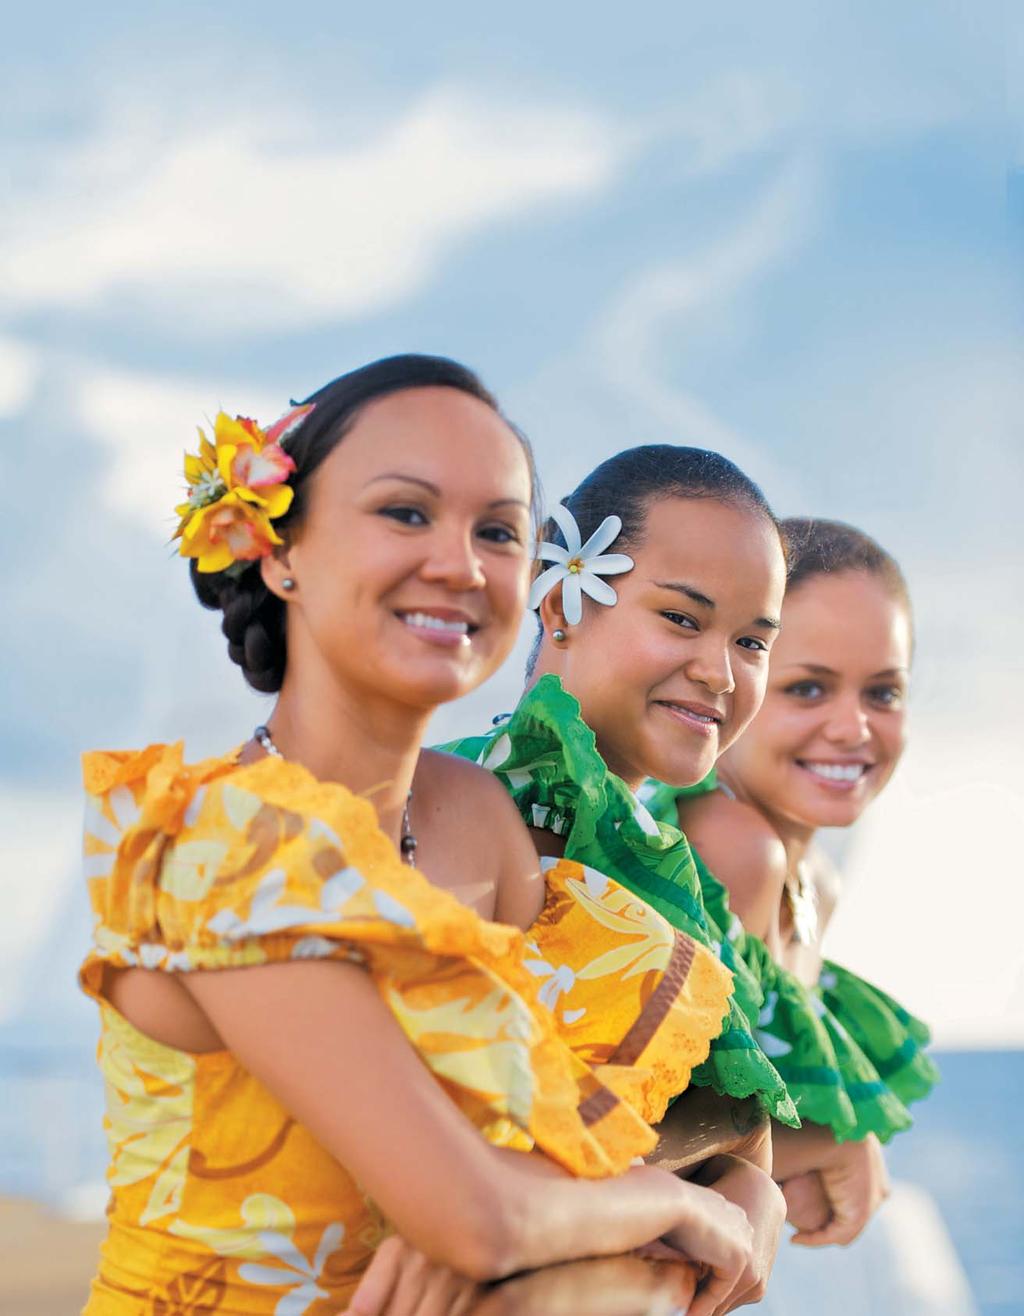 Discover Tahiti s Best All-Inclusive Experience Visit islands beyond the ordinary Tahiti, Bora Bora, Moorea, Huahine, Taha a in comfort and style on this